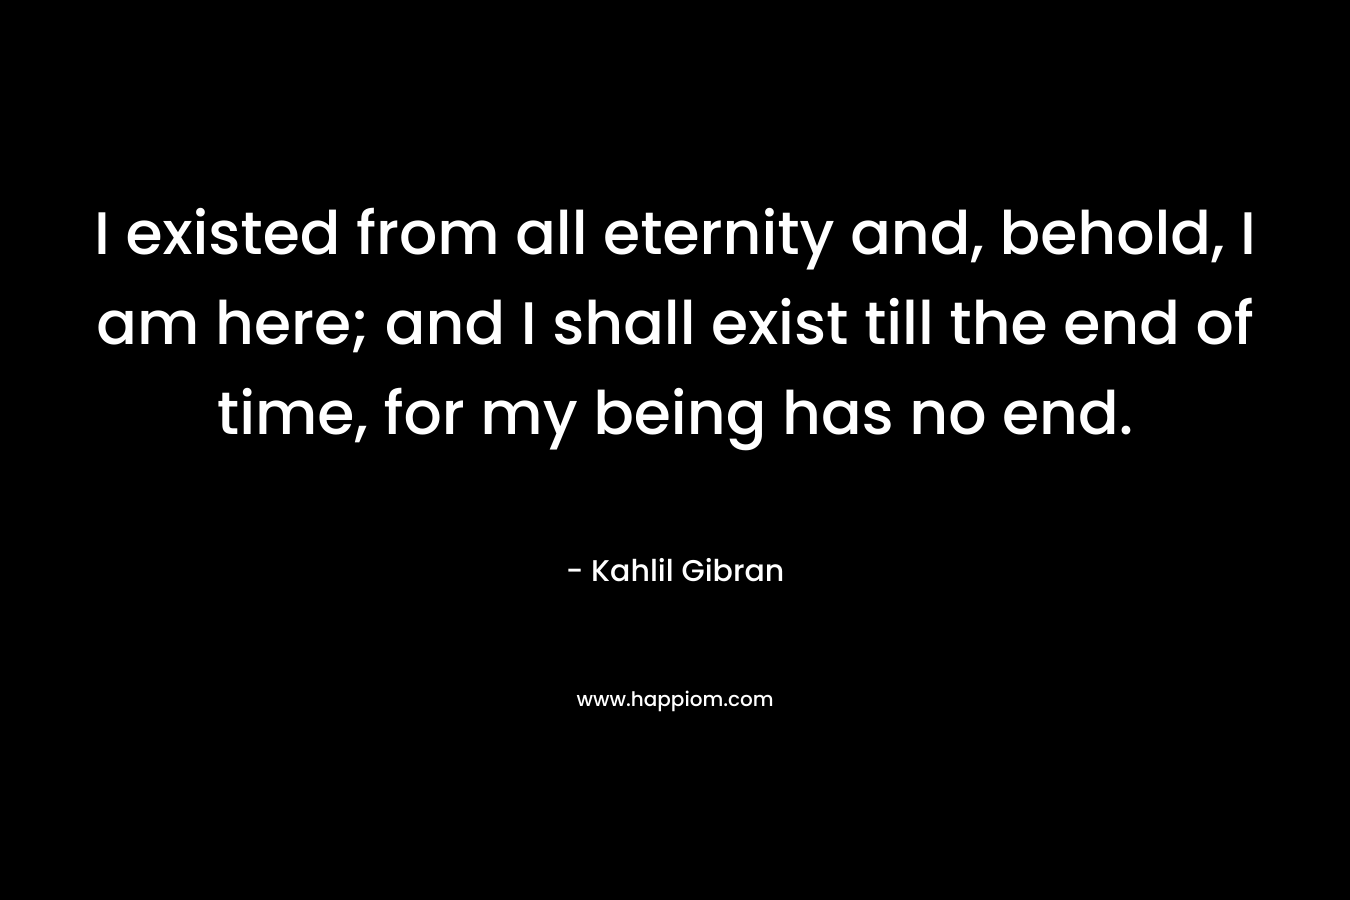 I existed from all eternity and, behold, I am here; and I shall exist till the end of time, for my being has no end. – Kahlil Gibran